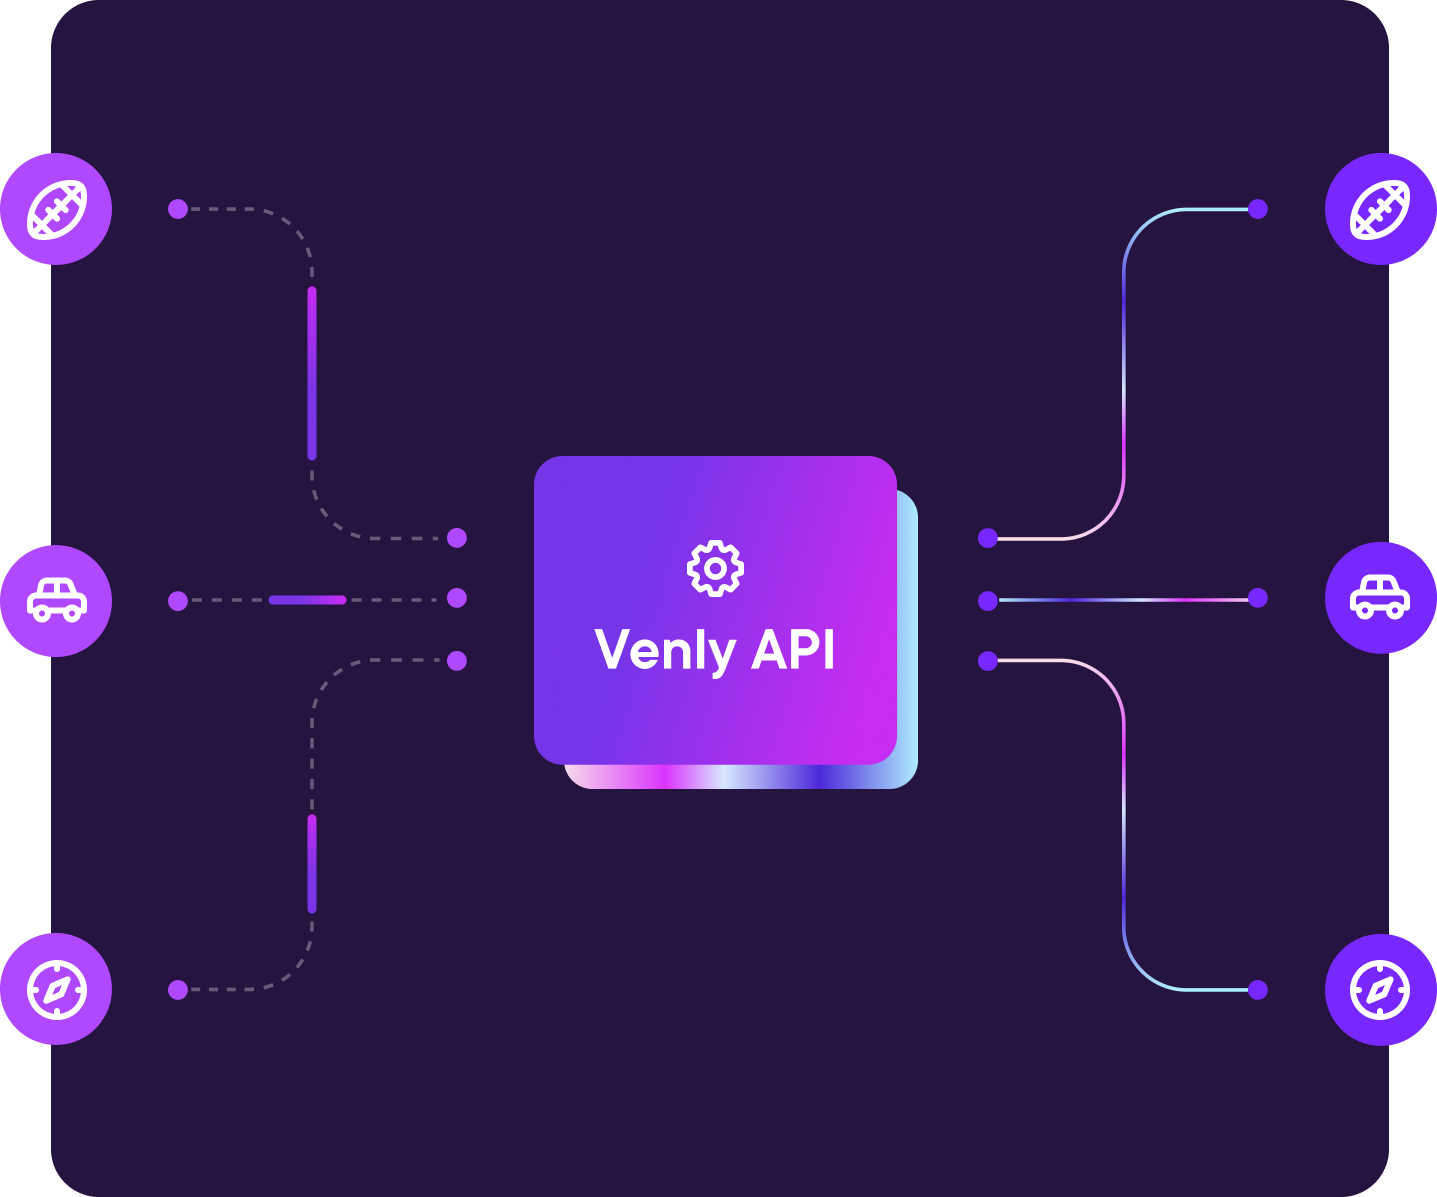 venly api Venly is a universal wallet, API, and SDK provider for nine different Blockchains and expanding. The development tools allow developers and game studios to create decentralized games while users can manage different wallets under a single account.